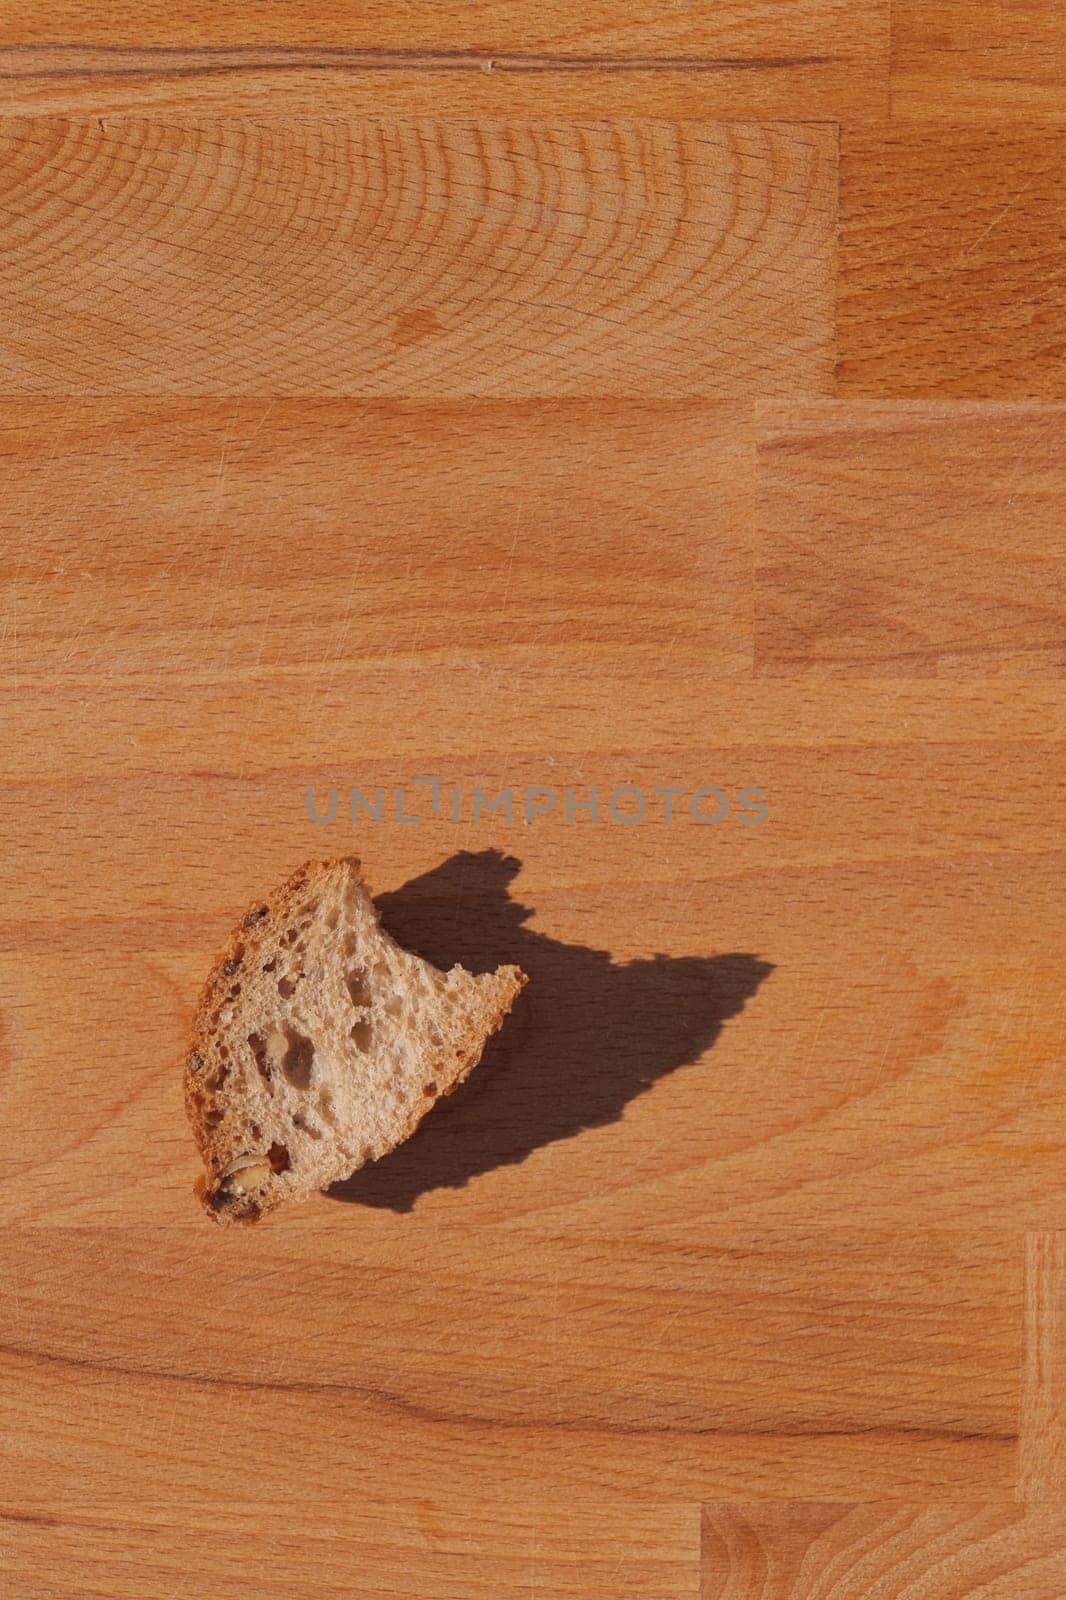 A single slice of bread casting a shadow on a wooden surface